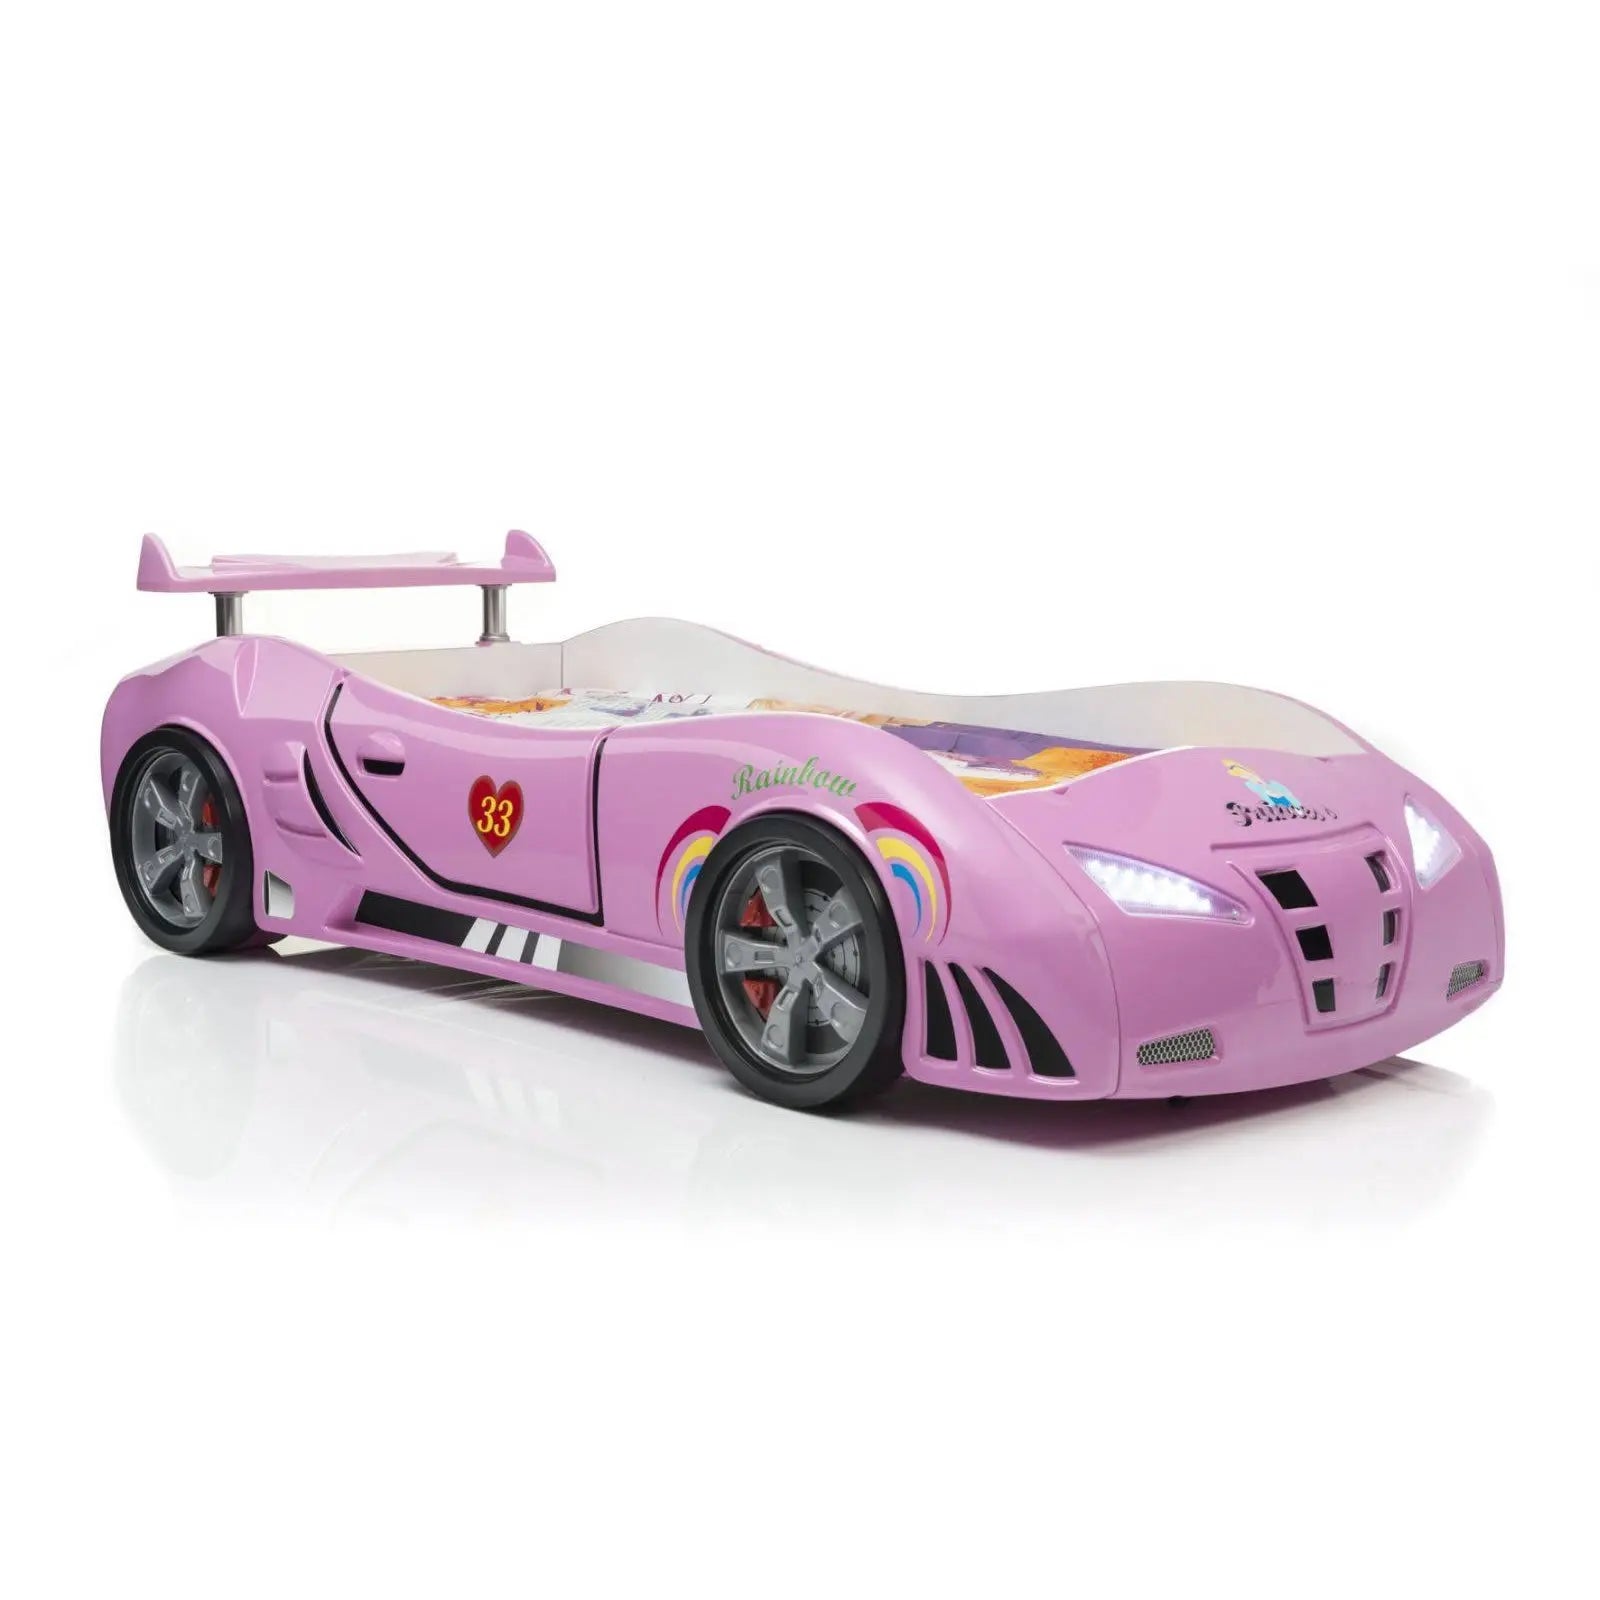 files/M3-Infiniti-Race-Car-Bed-for-Kids-w-LEDs_-Sound-effects-and-Free-Mattress-CaKidsRoom-1686084251_1600x1600_d6b40b32-e264-4ce5-af8a-4a1b666949d7.webp